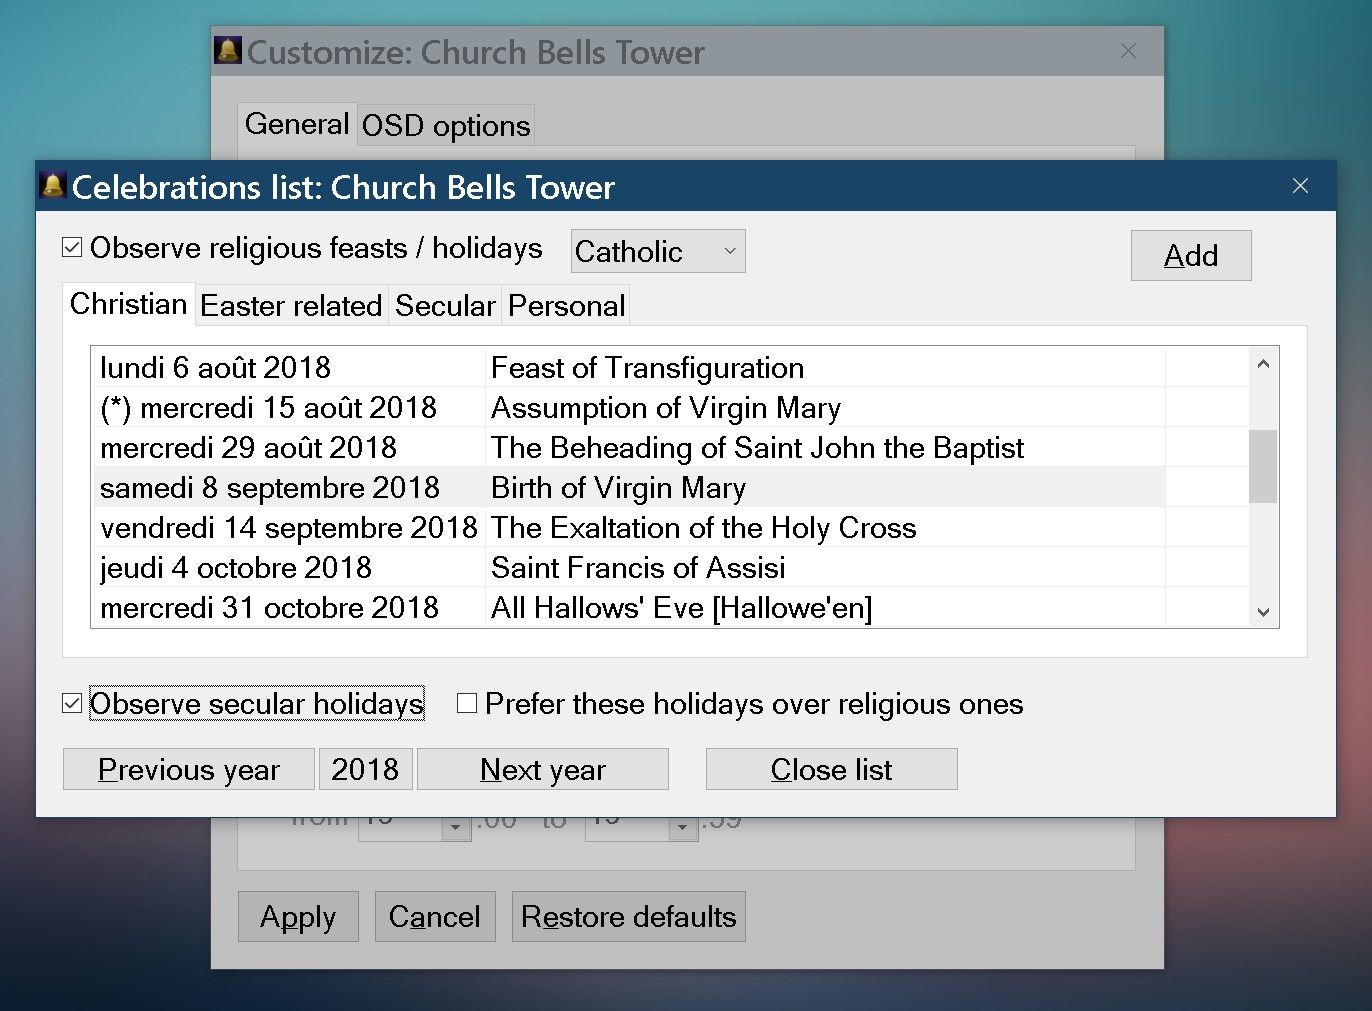 The panel where users can configure which holidays to observe: secular, Catholic or Orthodox. And also, add their own holidays.